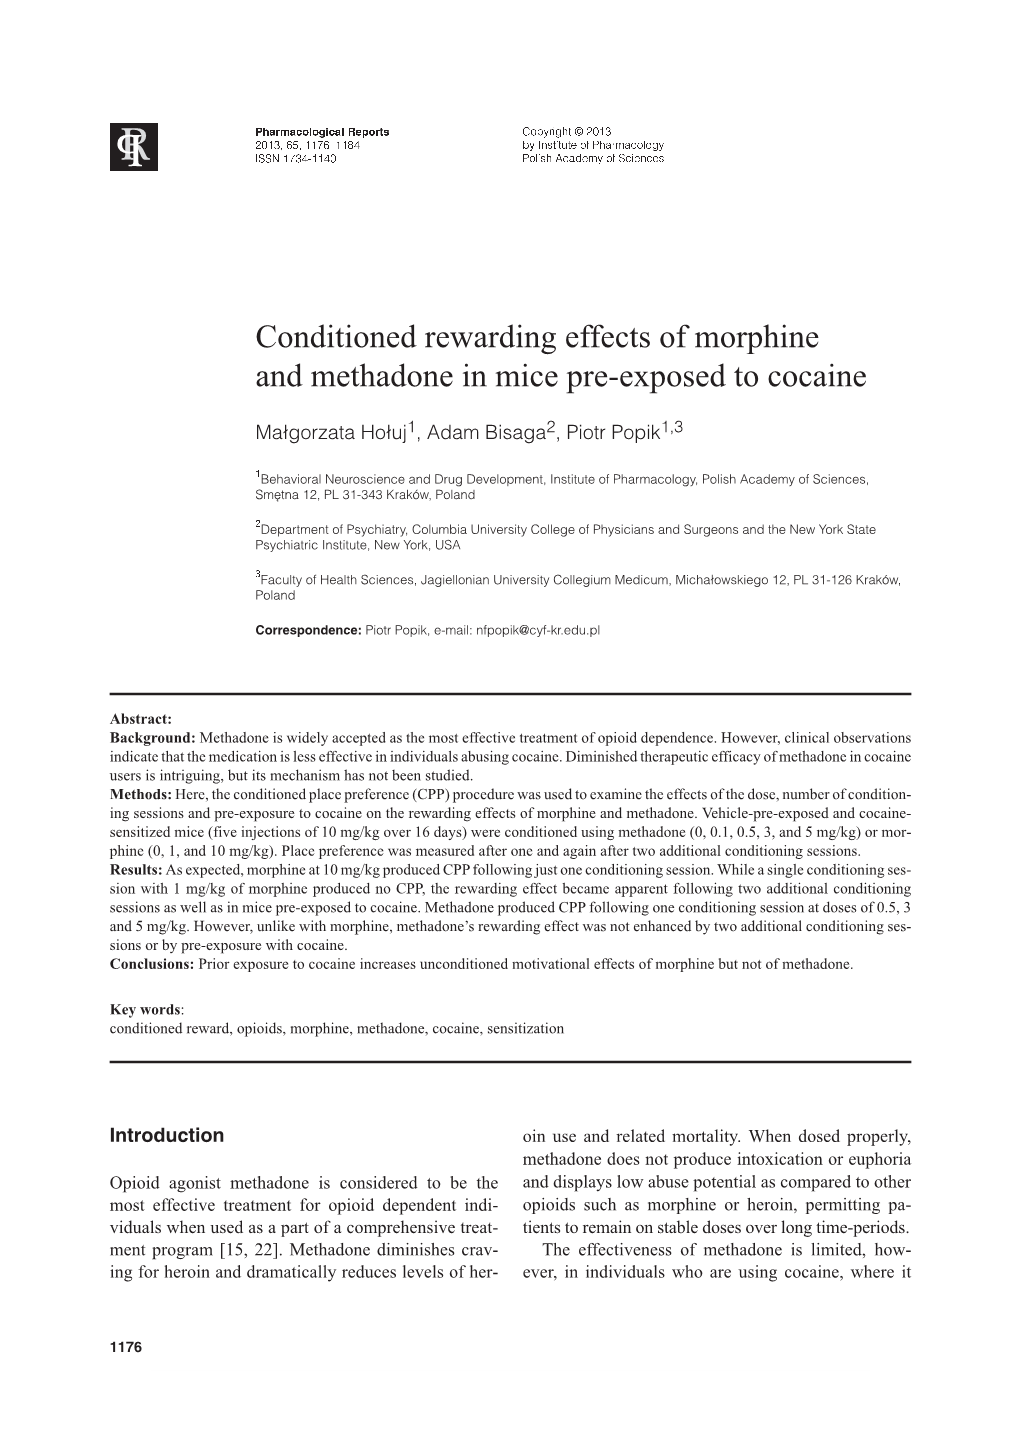 Conditioned Rewarding Effects of Morphine and Methadone in Mice